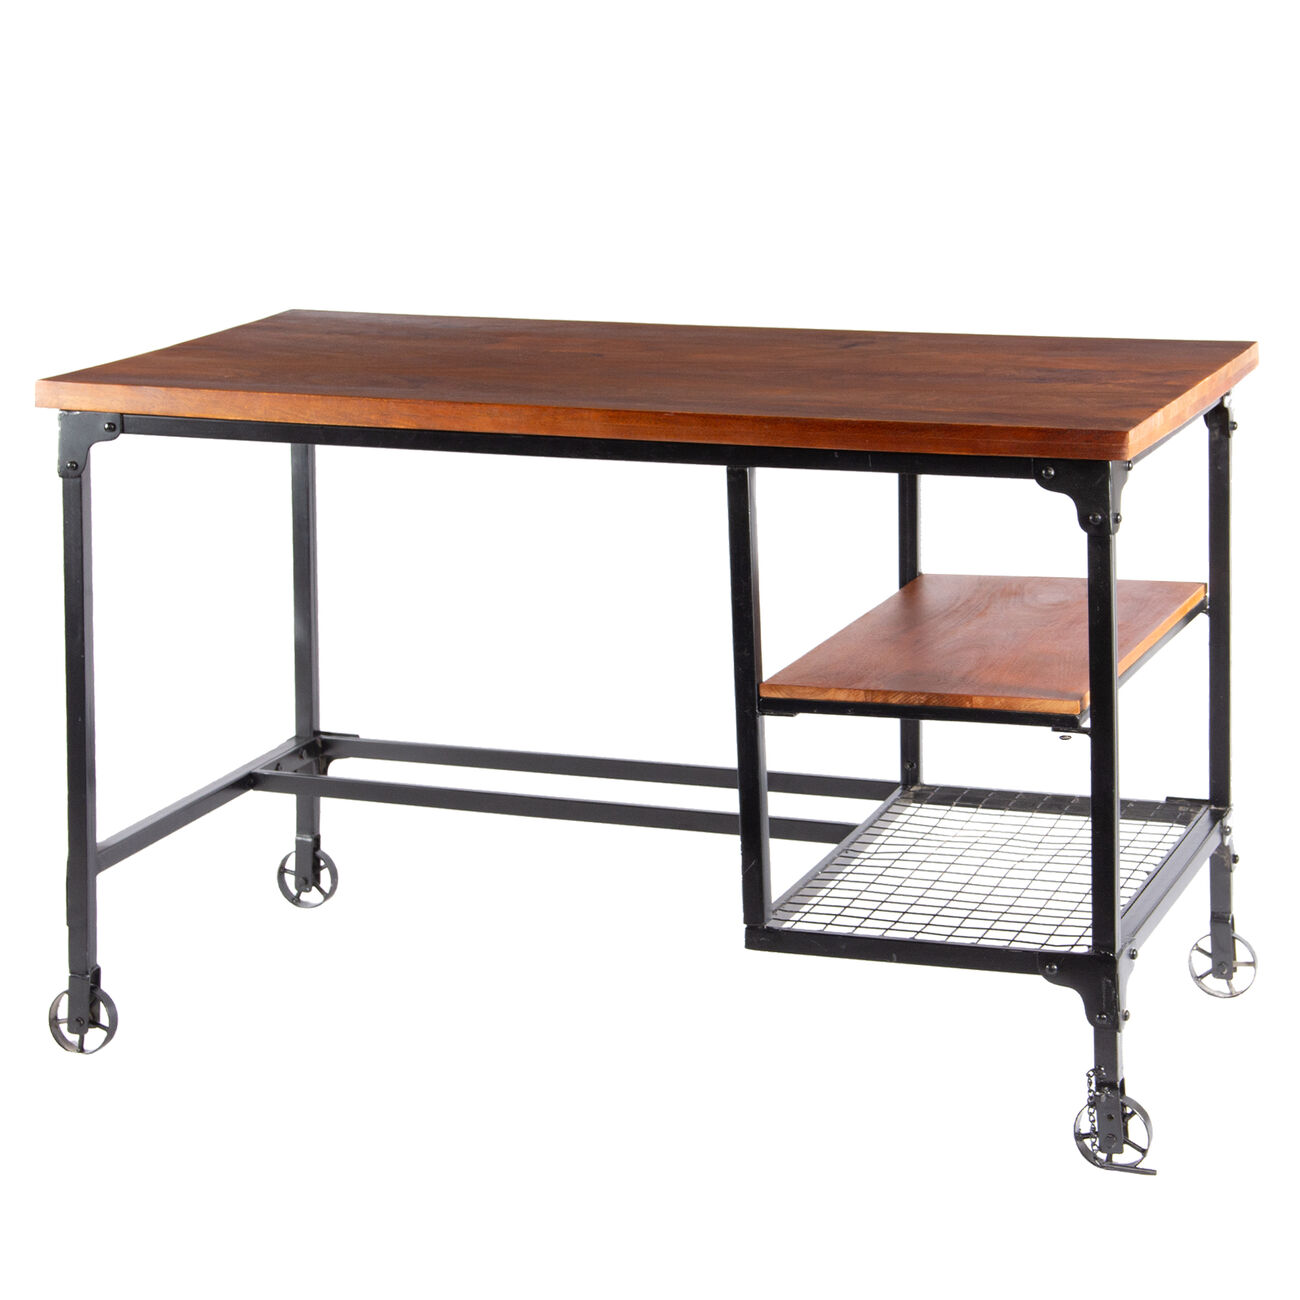 Industrial Style Wooden Desk With Two Bottom Shelves, Brown And Black